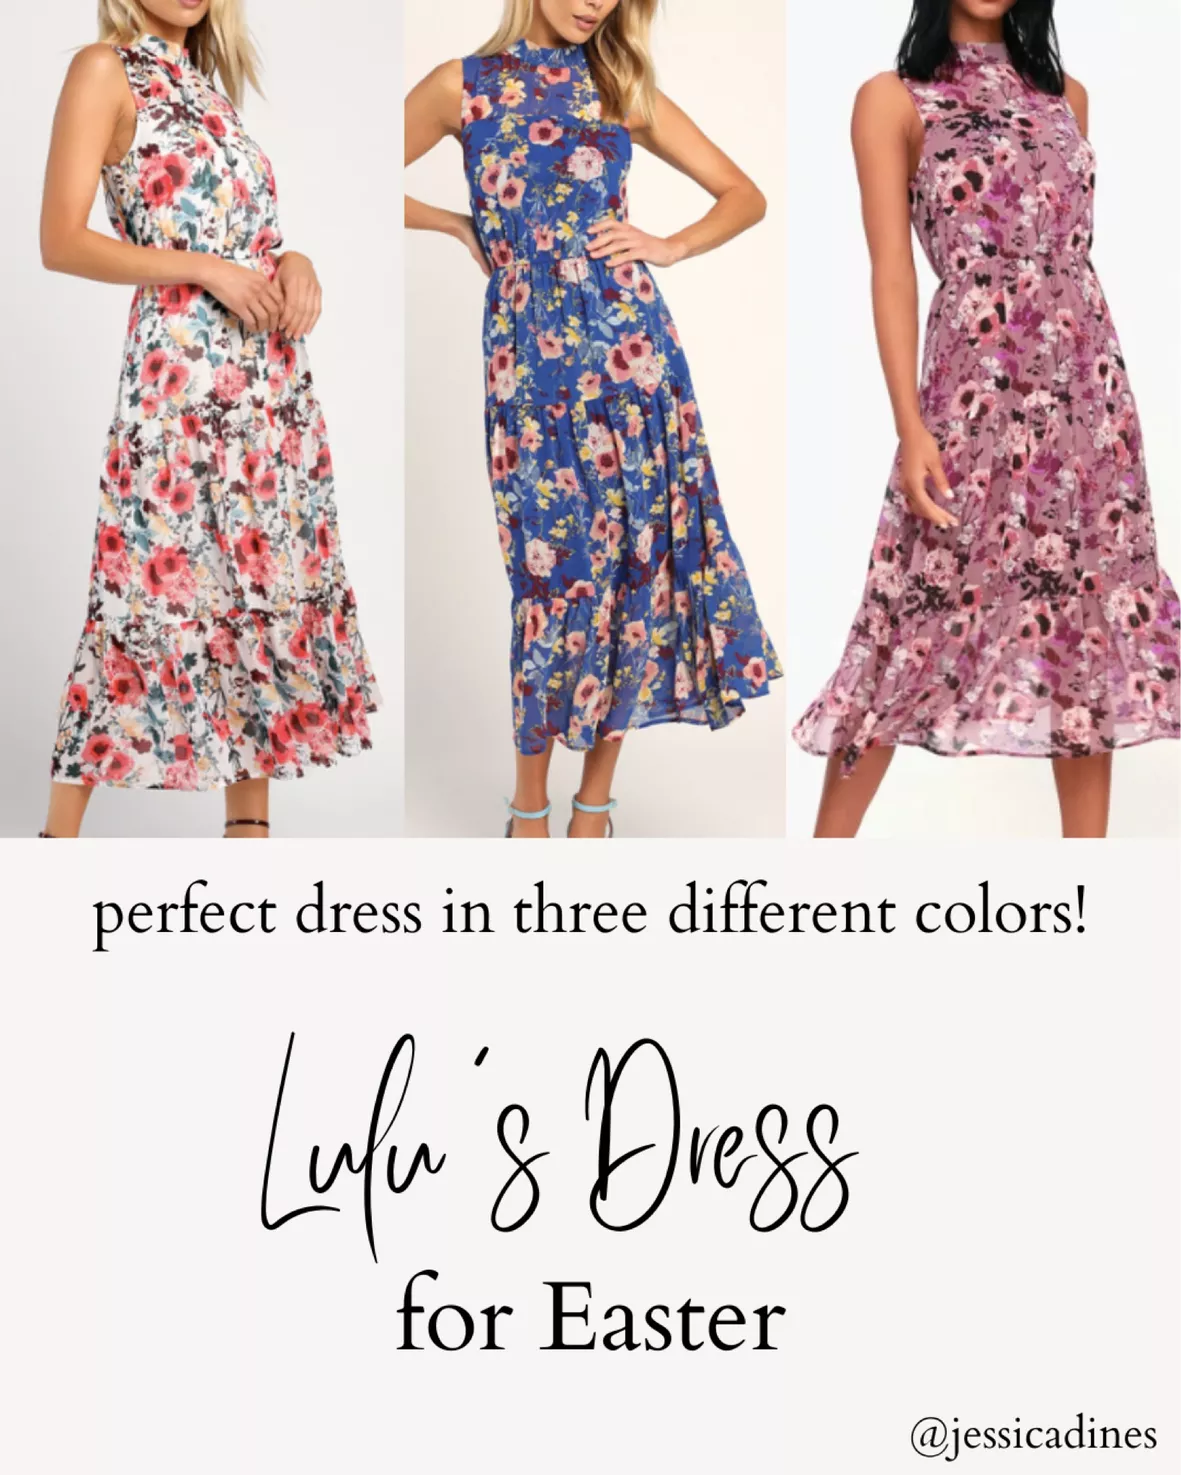 The Floral Dress of my Dreams